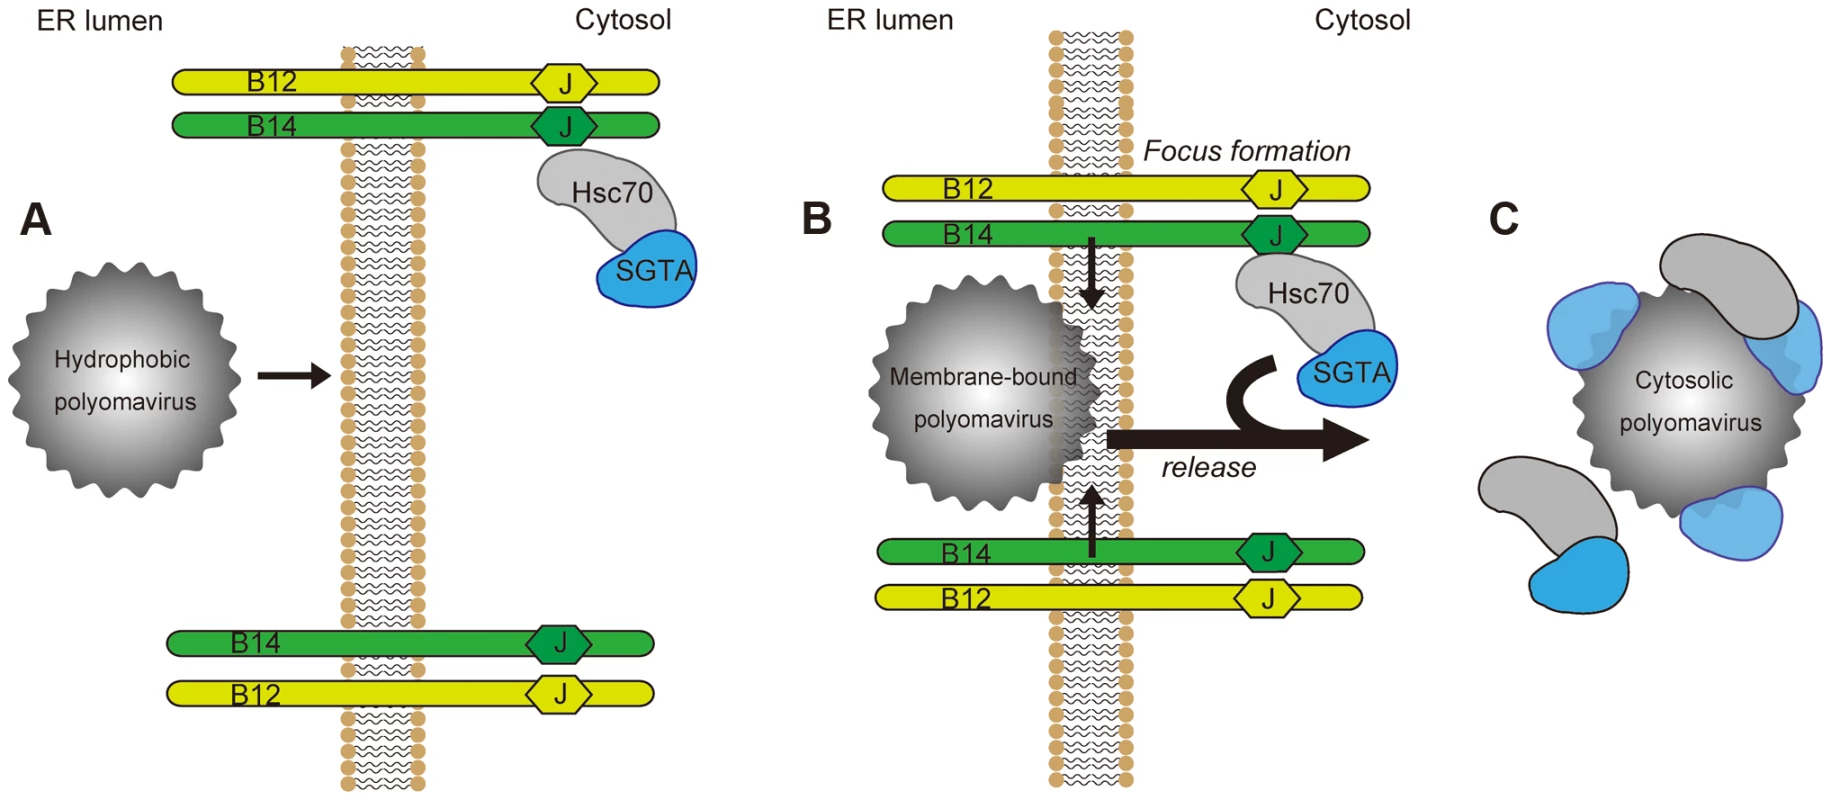 Model for ER-to-cytosol transport of polyomaviruses mediated by foci formation and cytosolic SGTA.